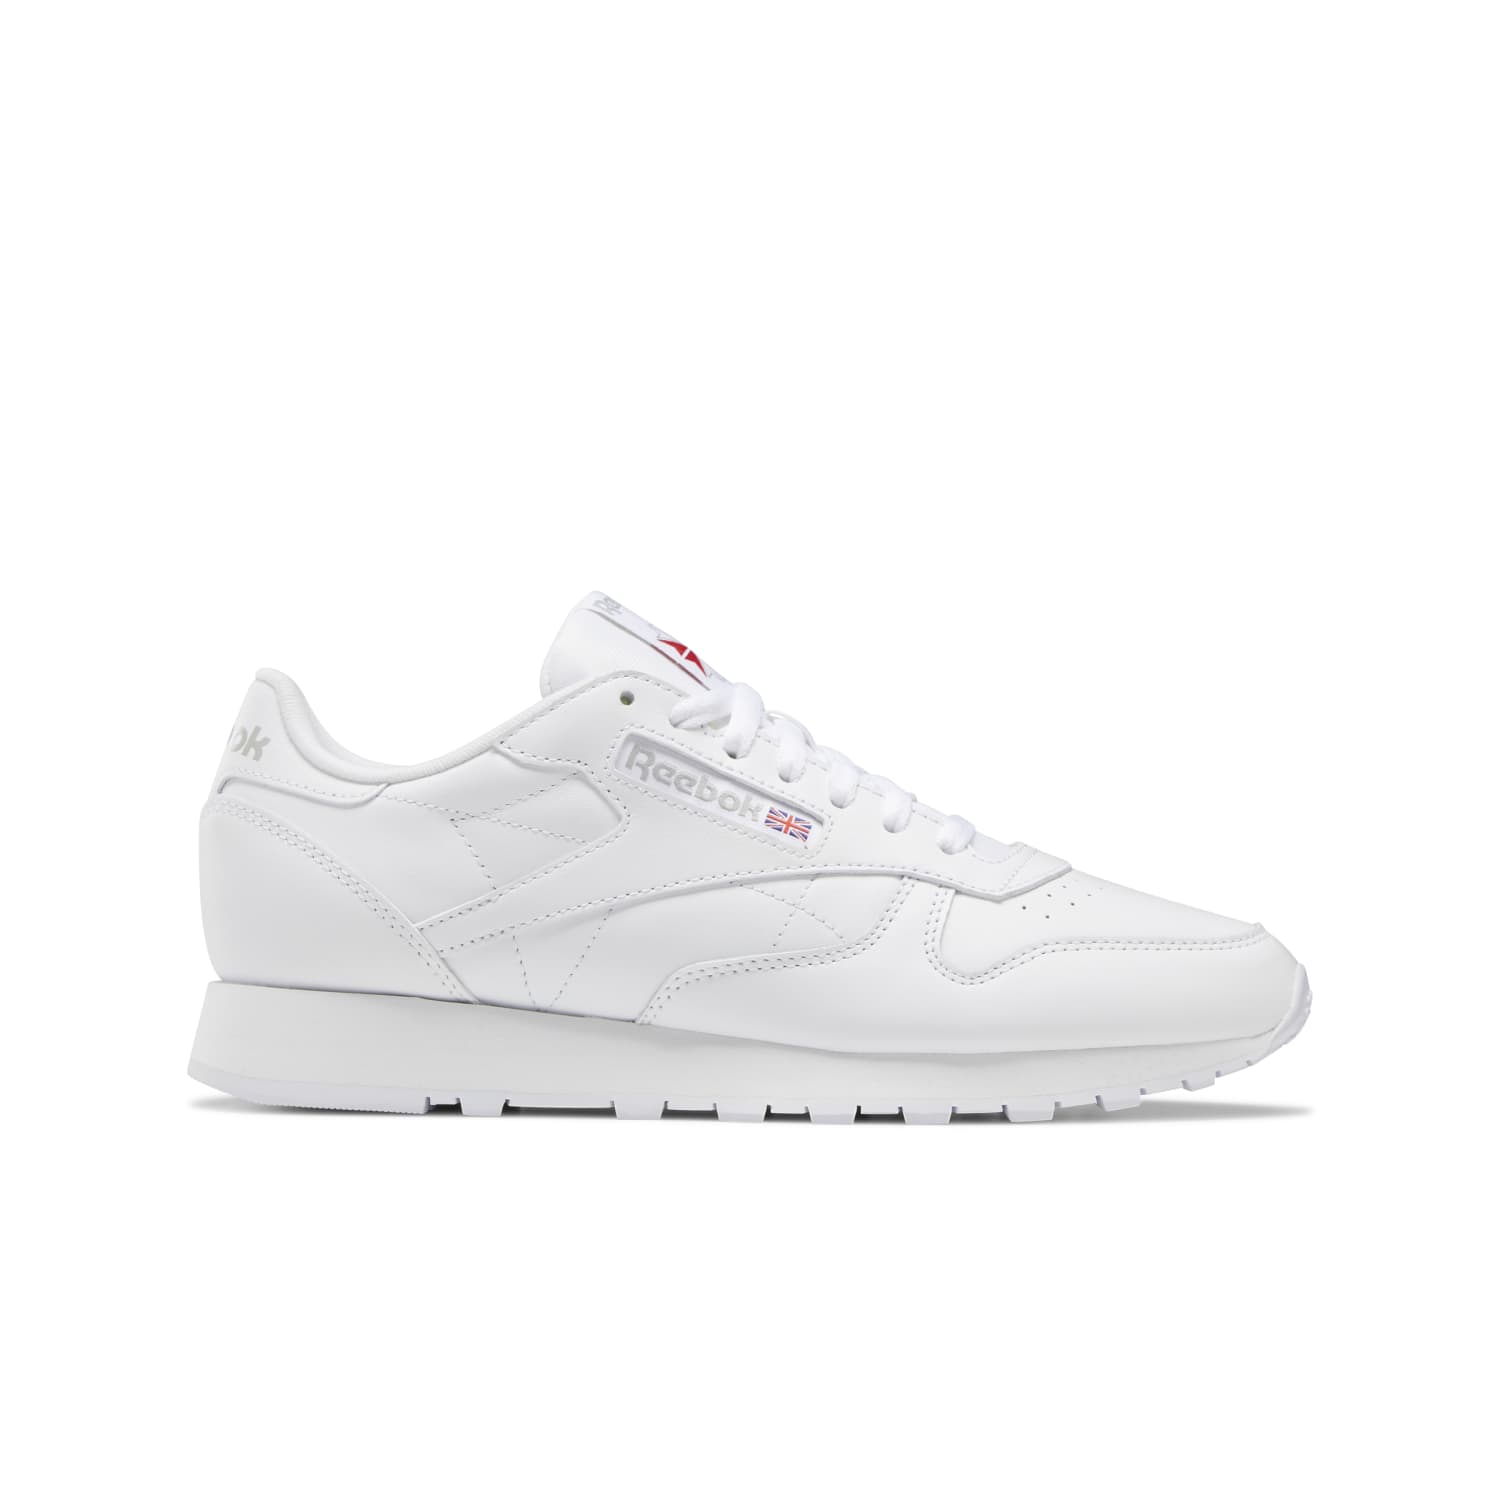 Reebok - CLASSIC LEATHER - 001.FTWHT/PUGRY3 Ανδρικά > Παπούτσια > Sneaker > Παπούτσι Low Cut